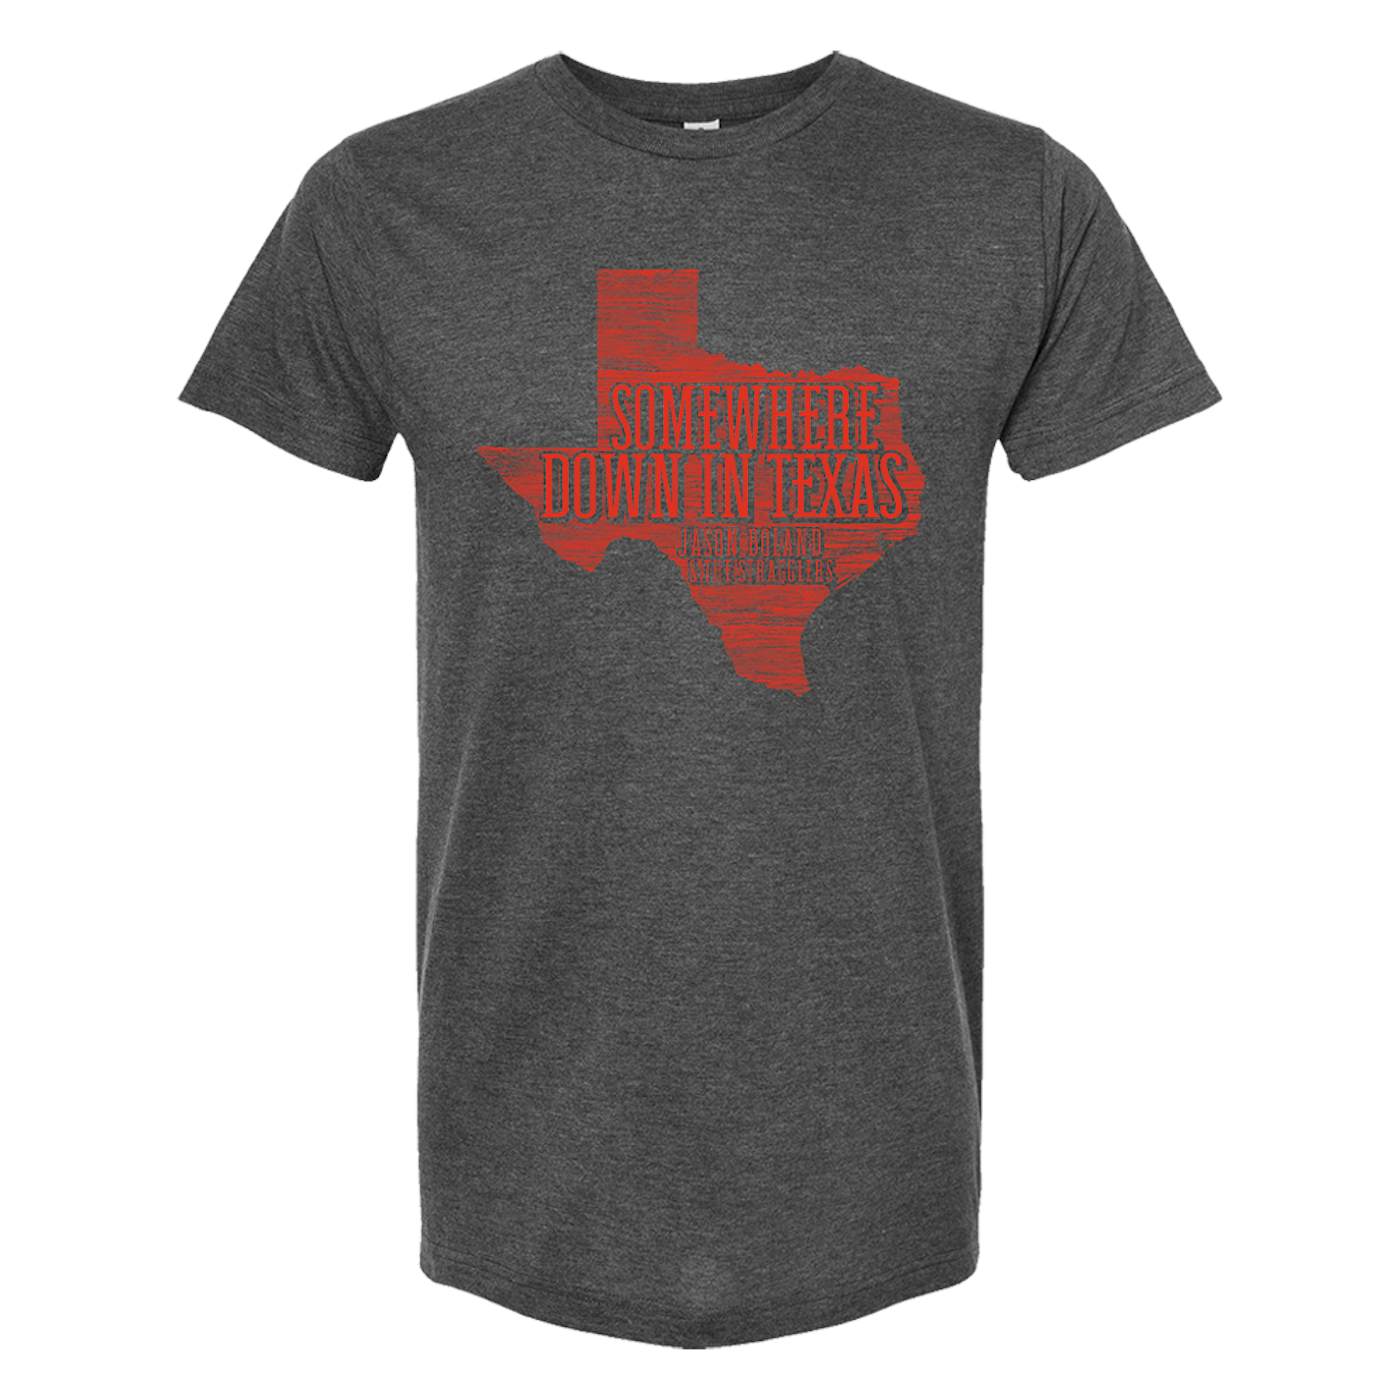 Jason Boland & The Stragglers Somewhere Down in Texas Tee - Grey